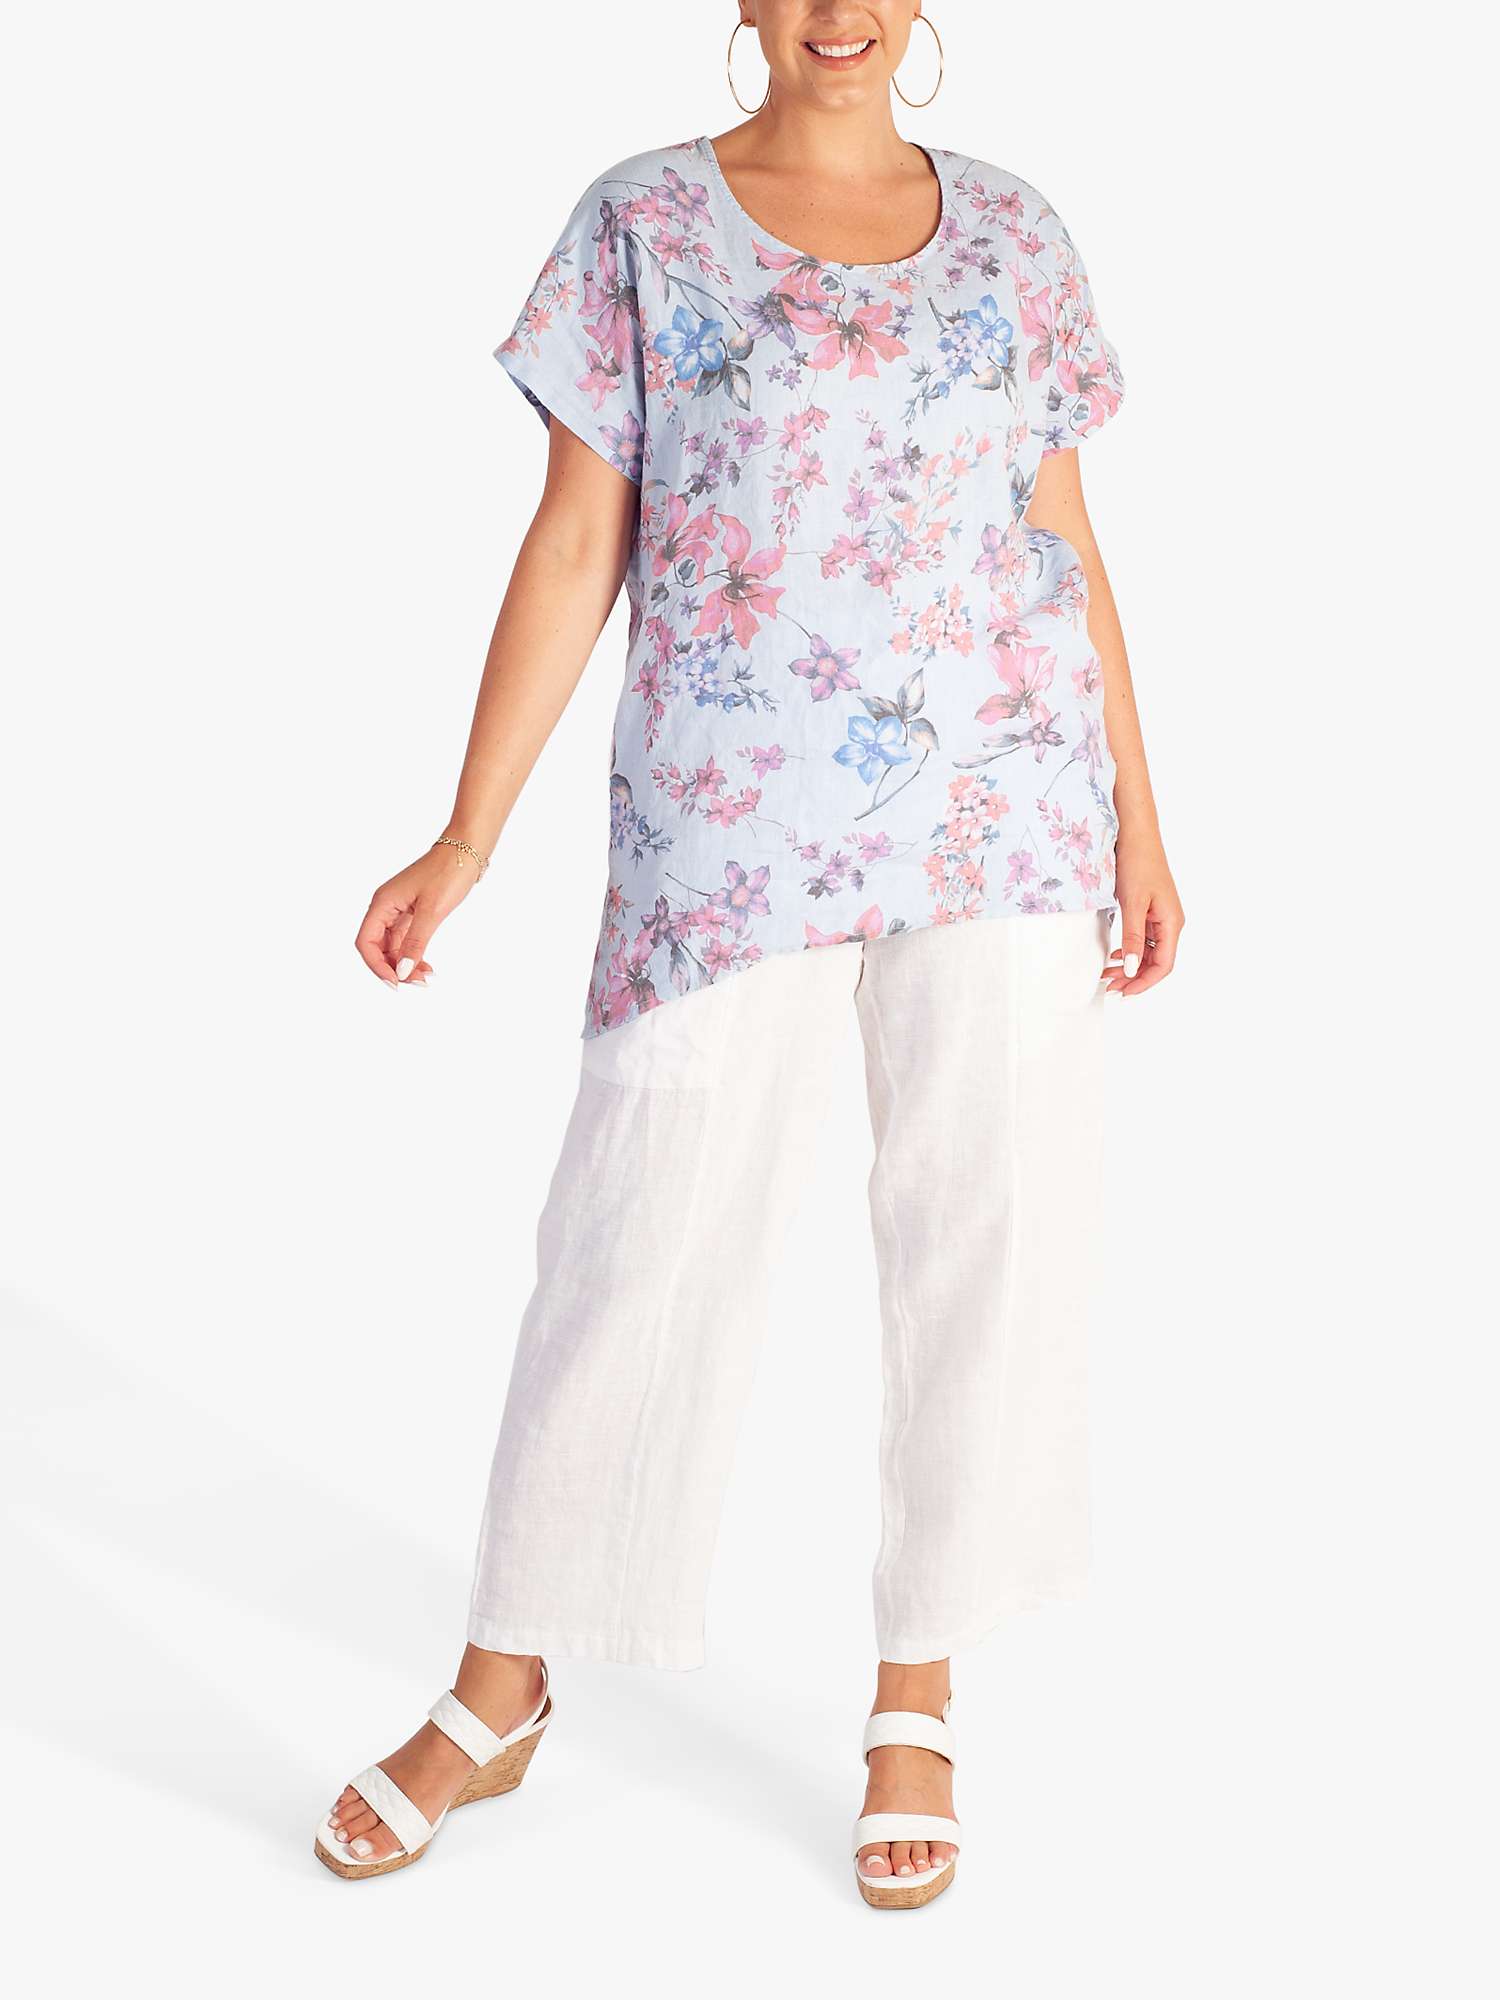 Buy chesca Linen Floral Short Sleeve Top, Baby Blue Online at johnlewis.com